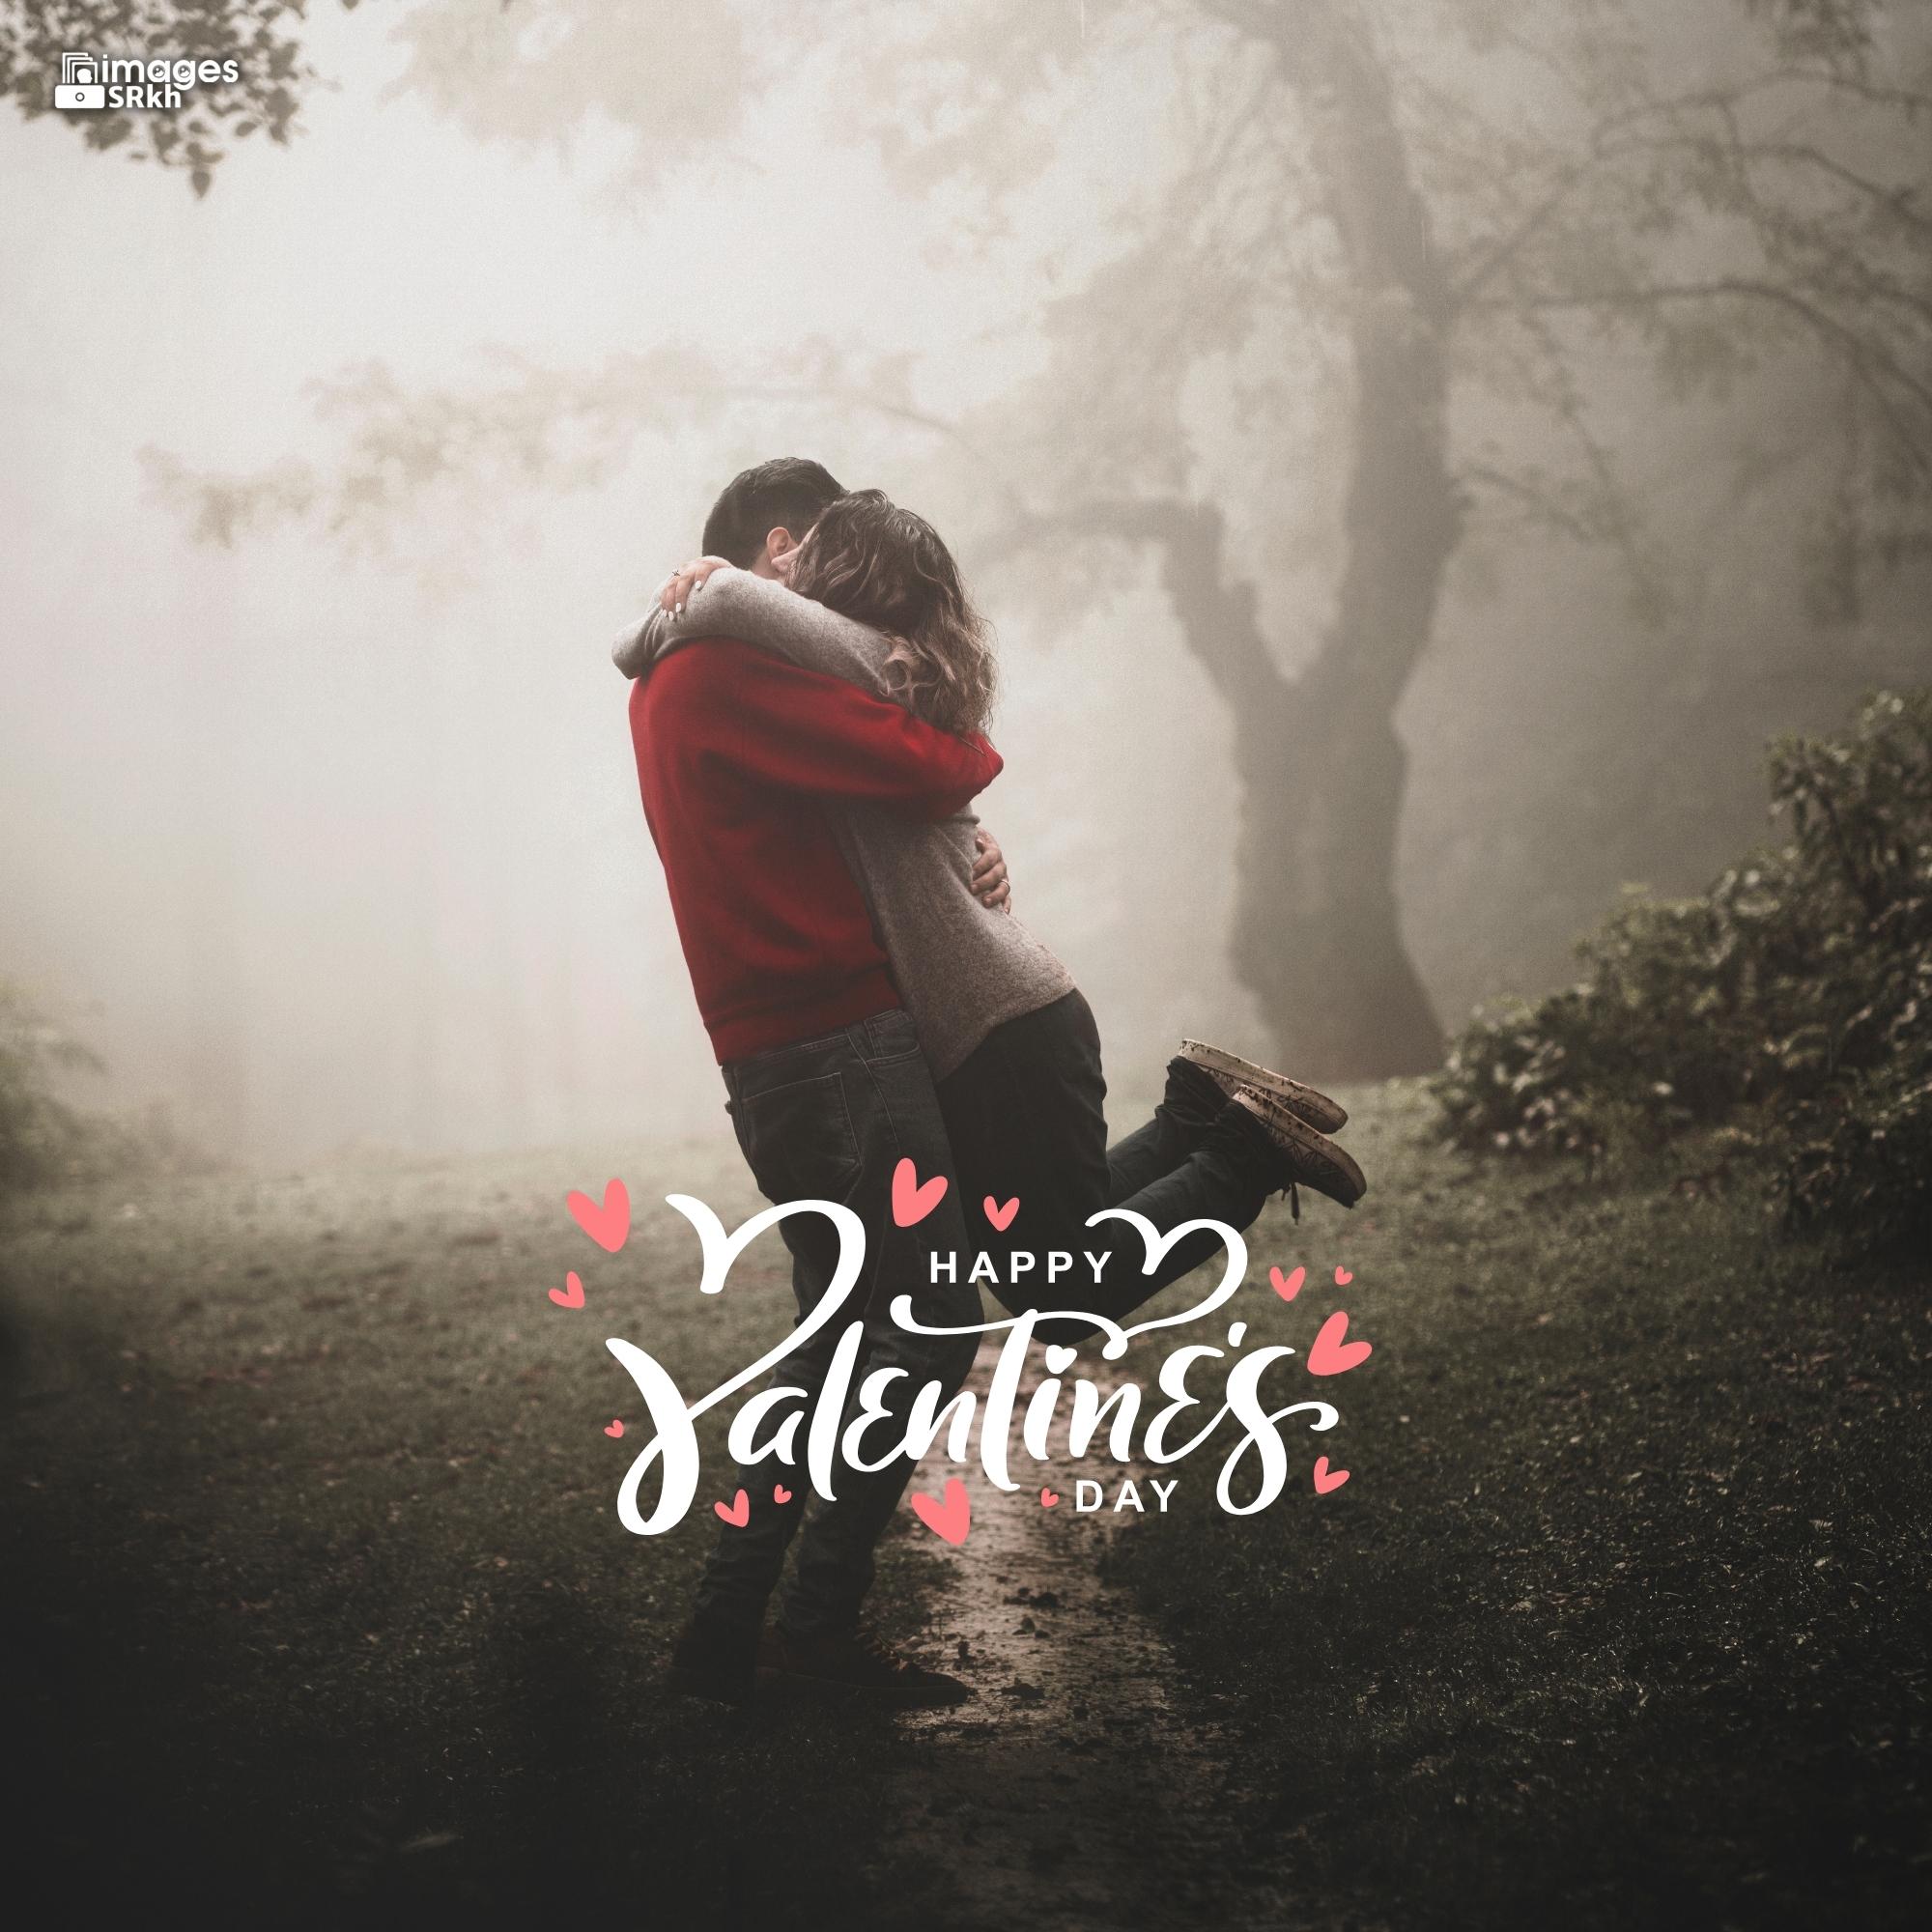 Happy Valentines Day | 559 | PREMIUM IMAGES | Wishes for Love